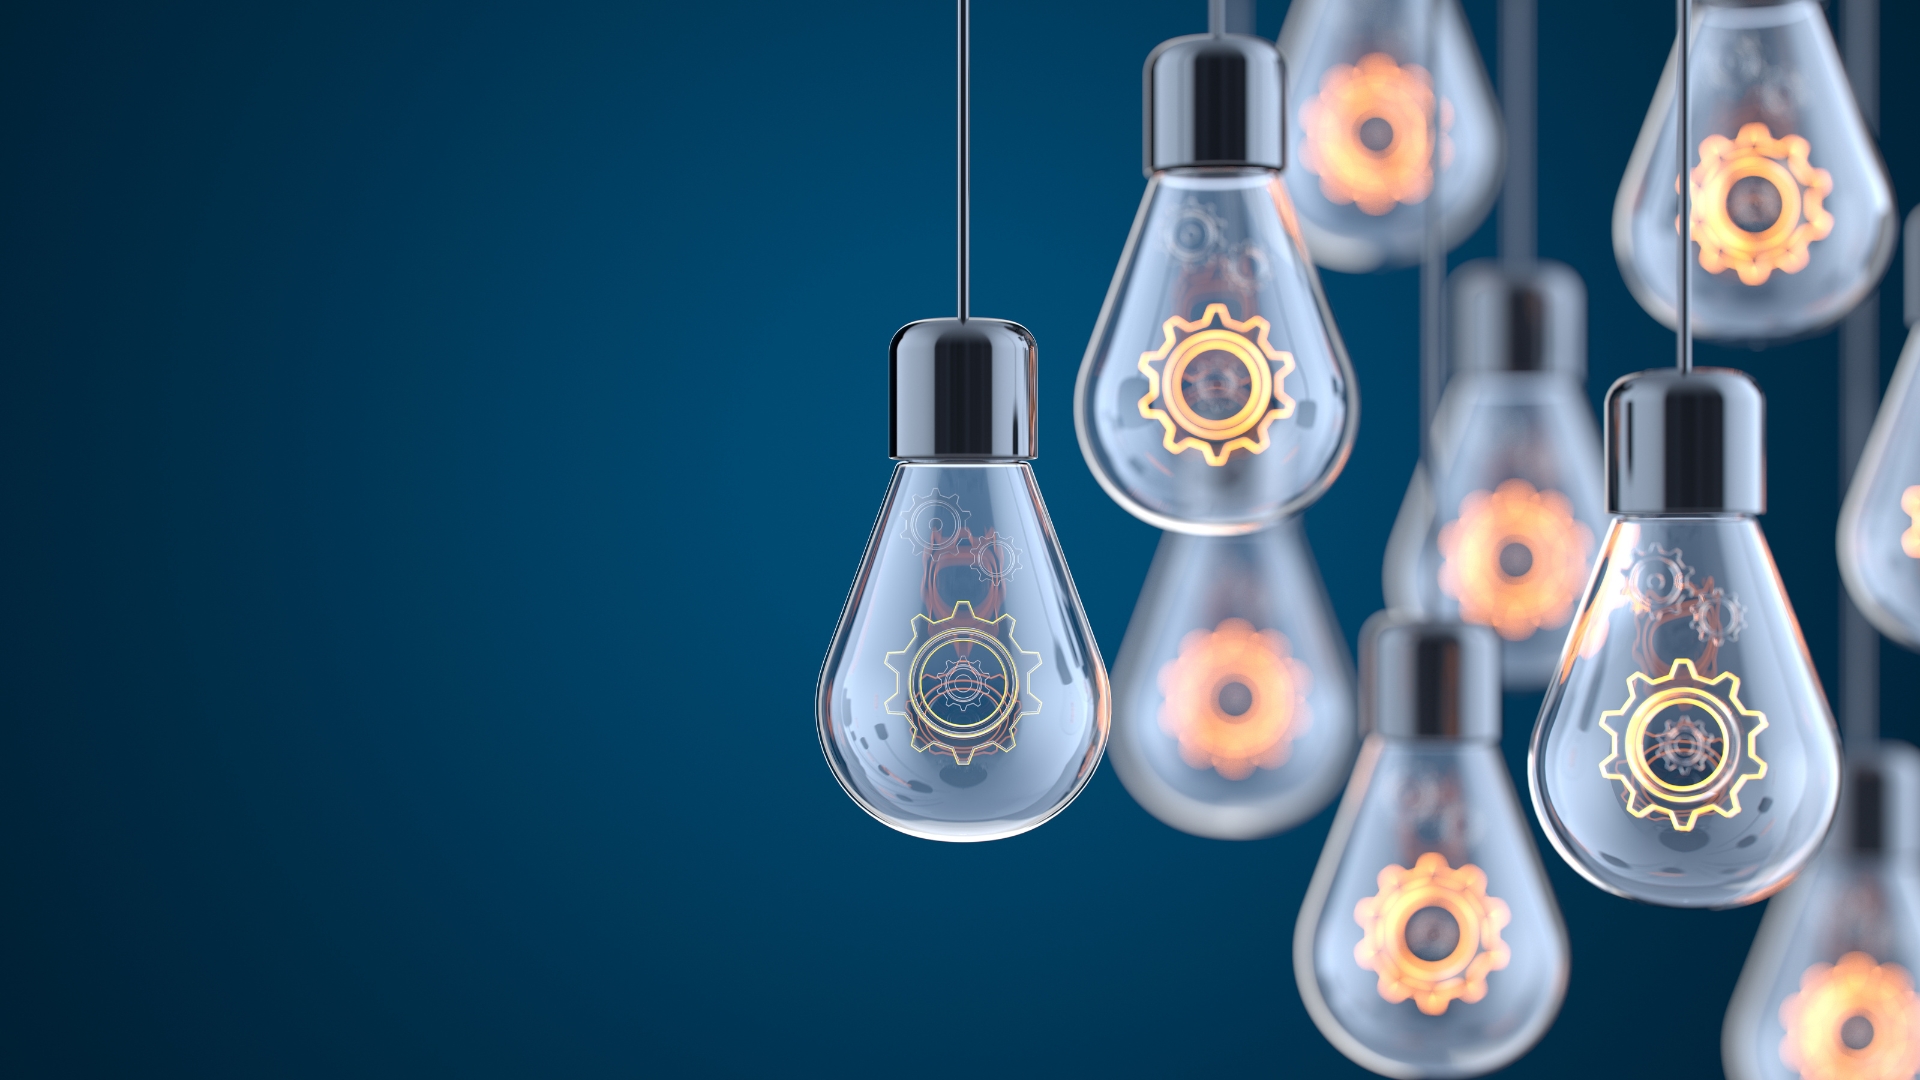 lightbulbs on blue background for product launch success